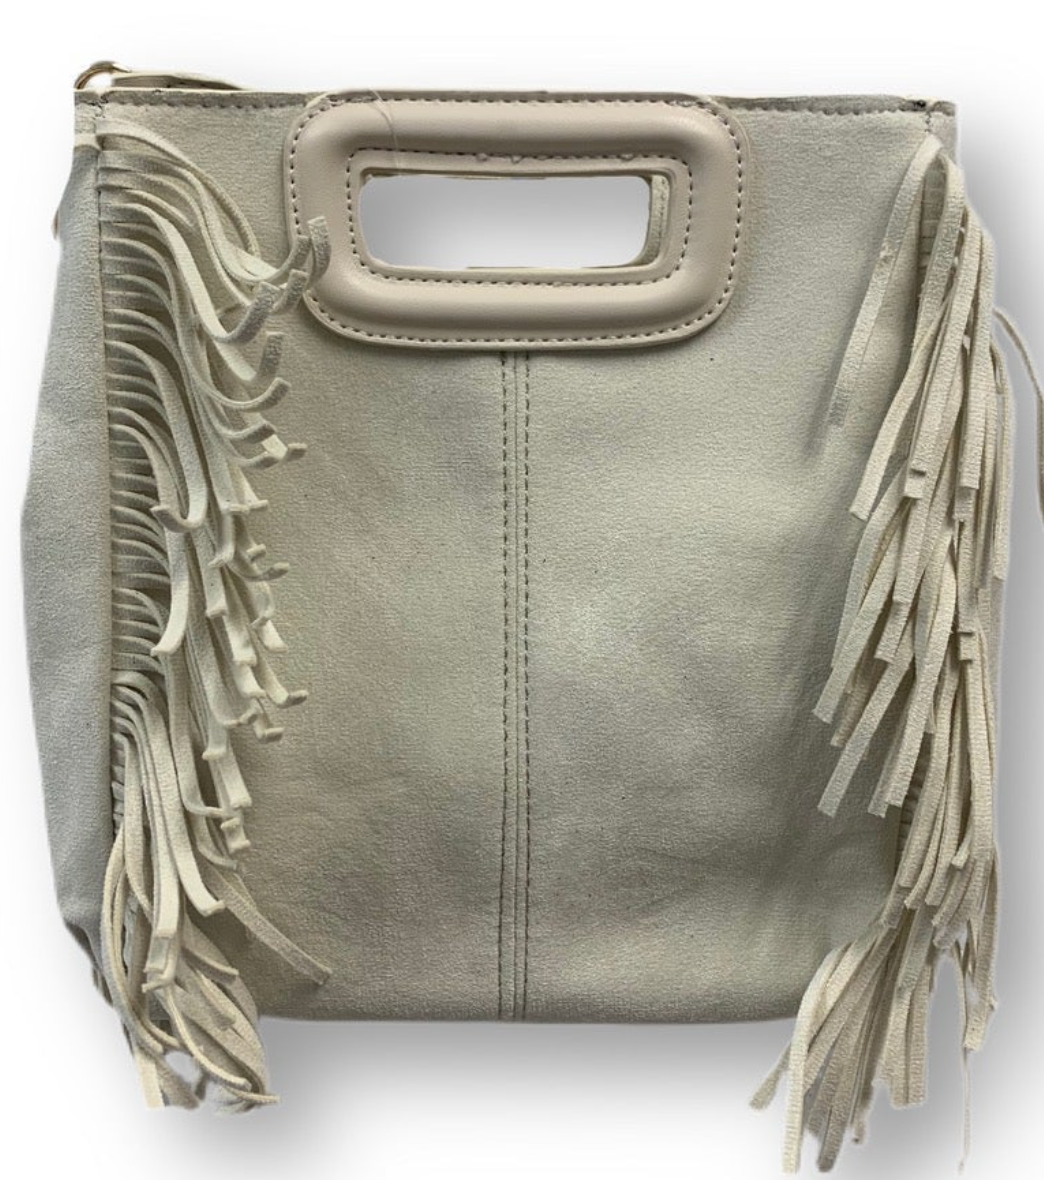 Suede Bag With Fringe and Skinny Strap